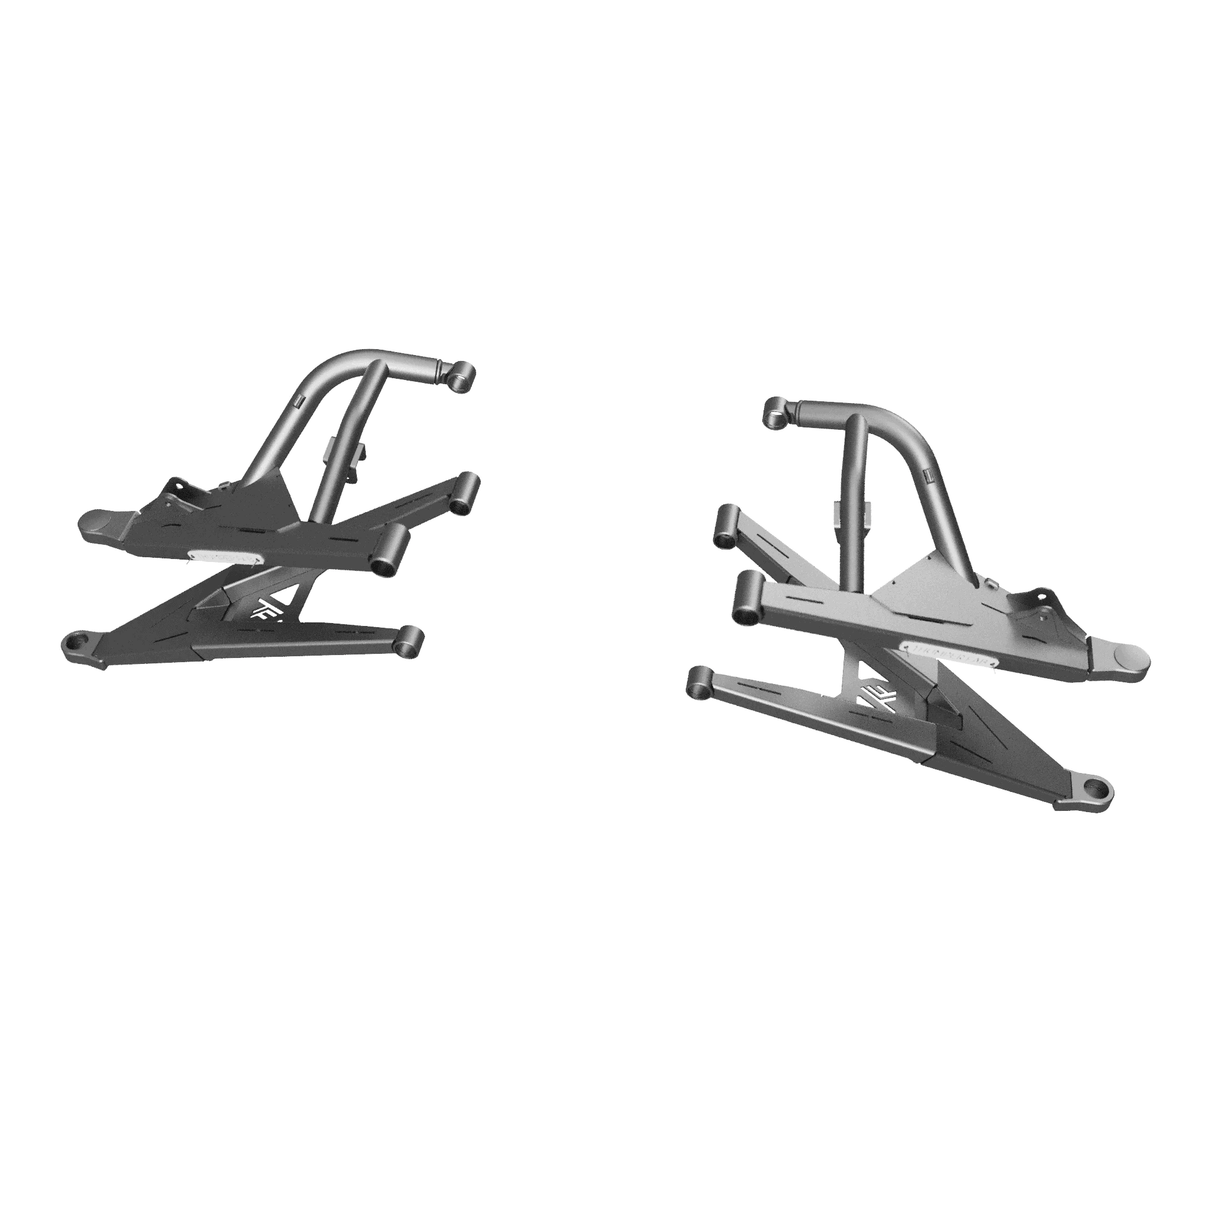 Thumper Fab Polaris General XP Forward Front Control Arms (Upper and Lower)